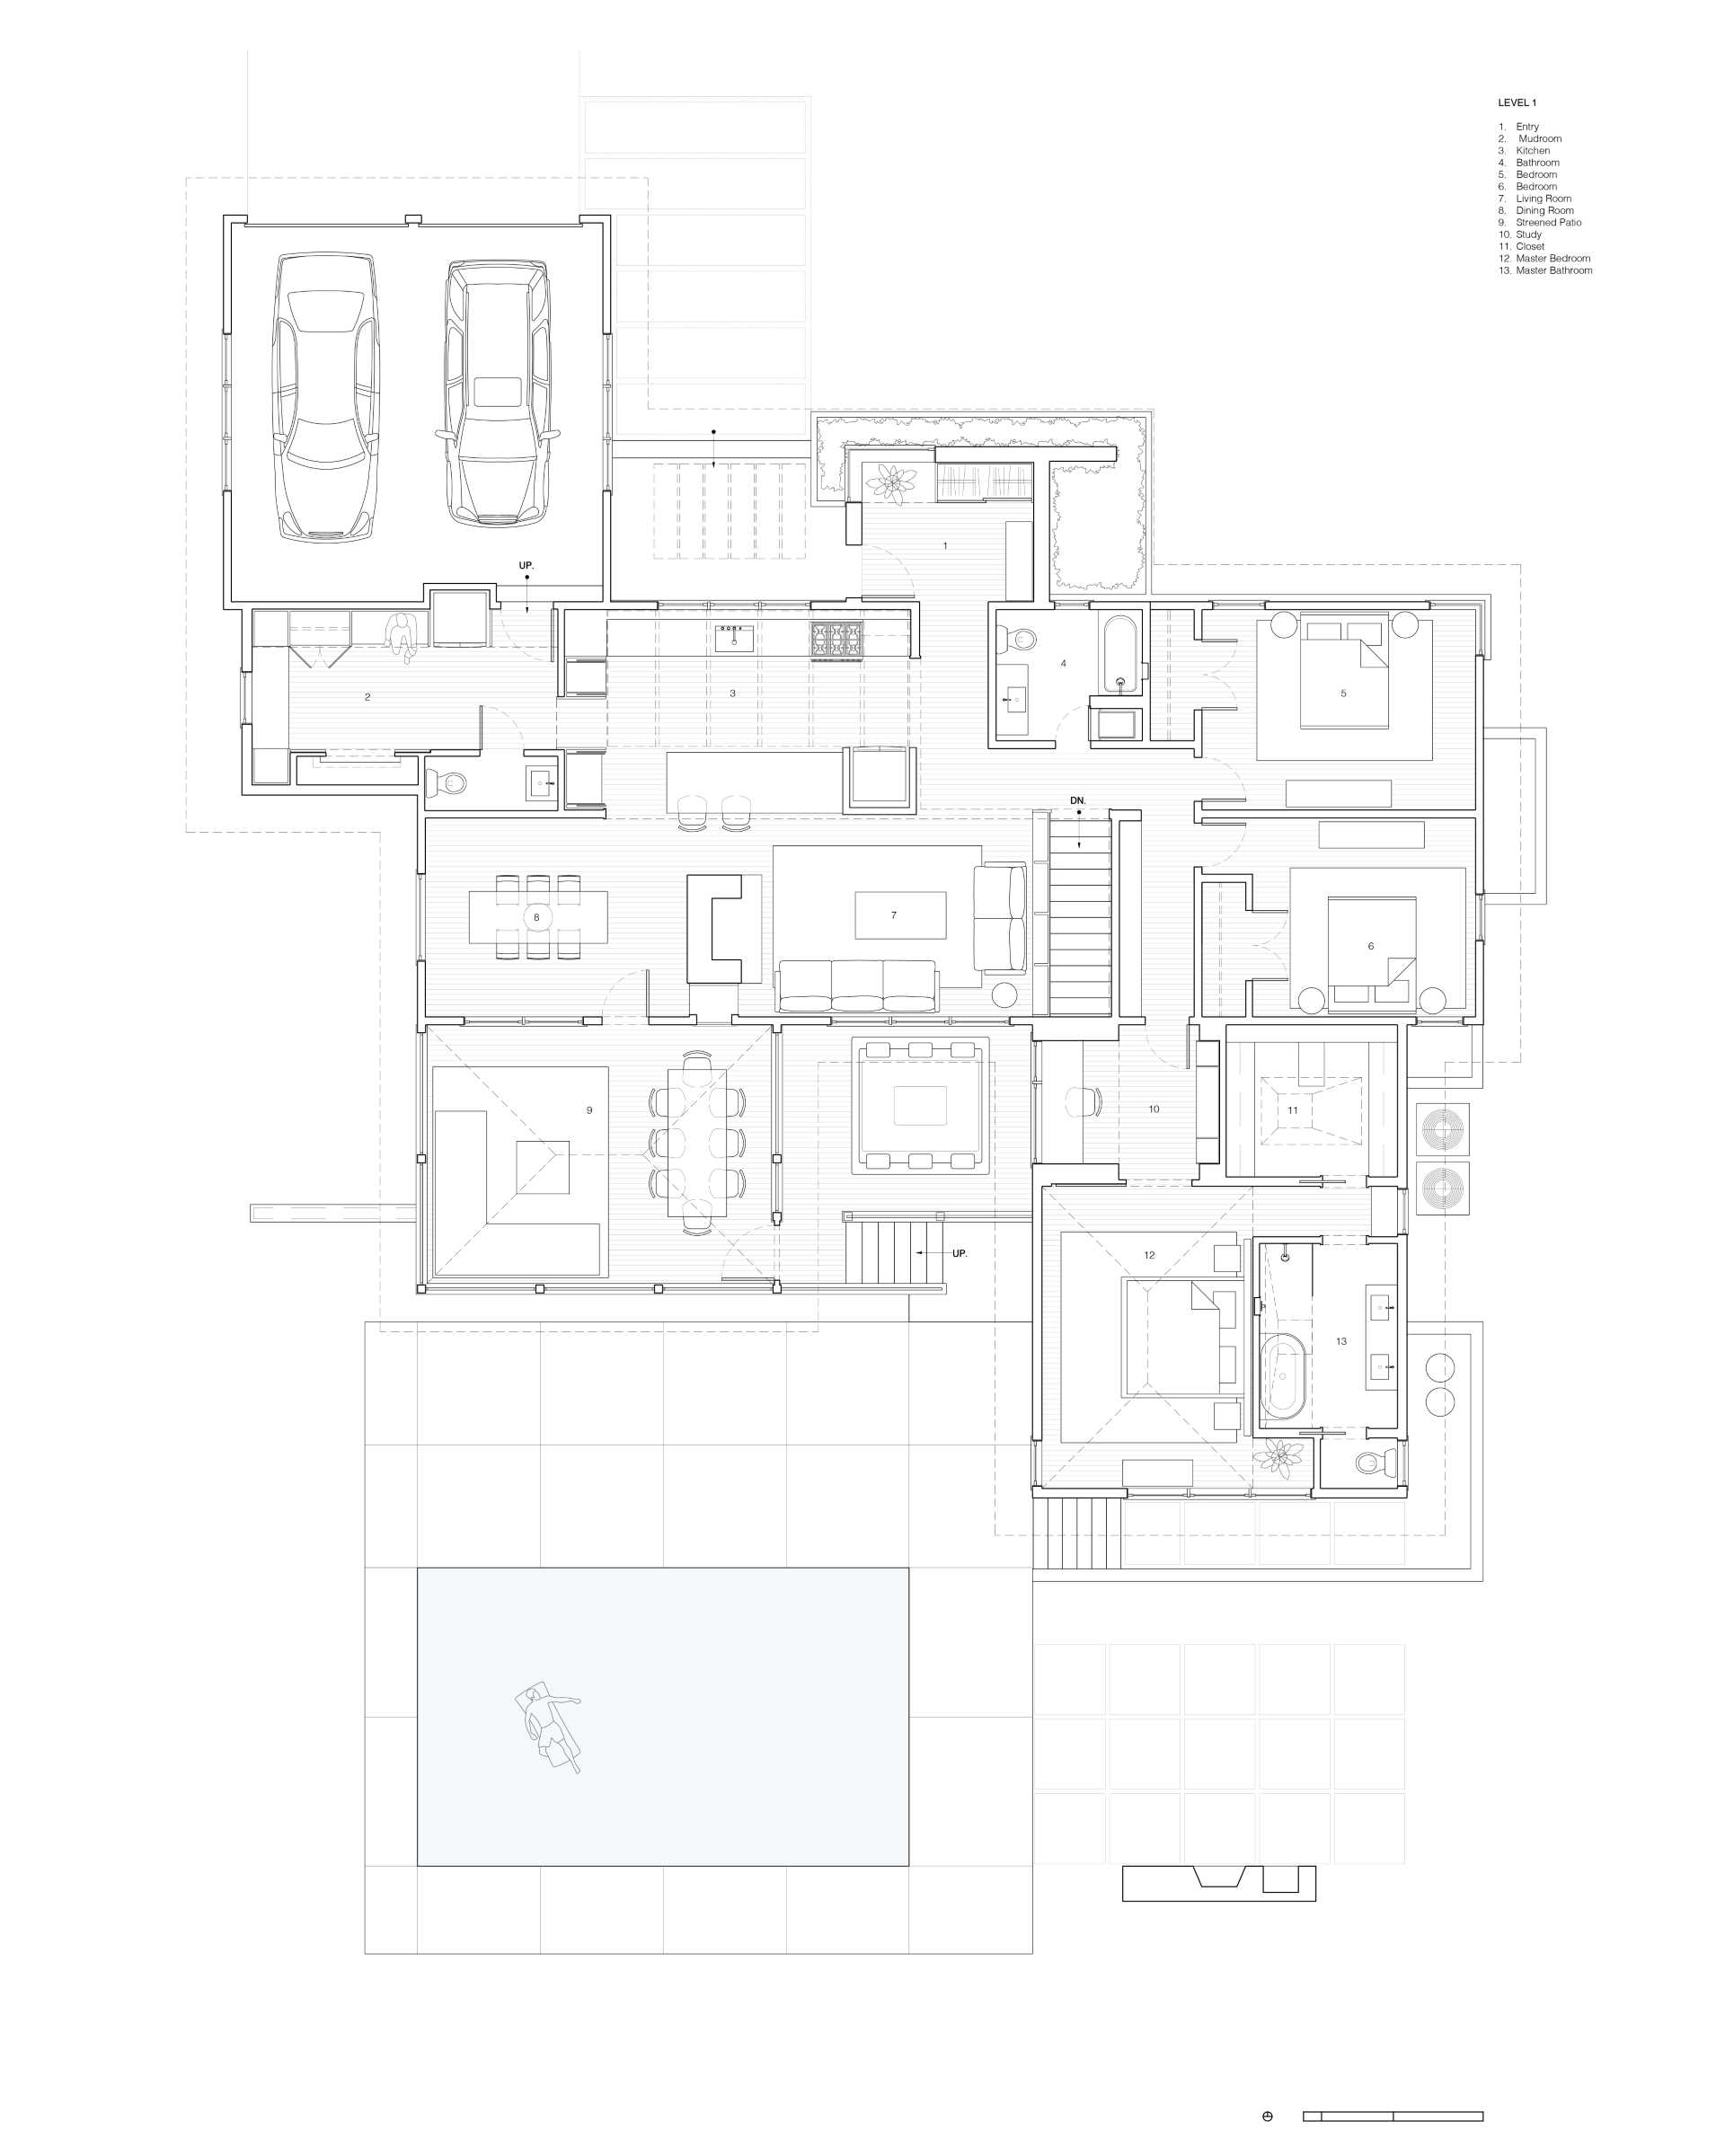 The floor plan of a renovation mid-century modern home.